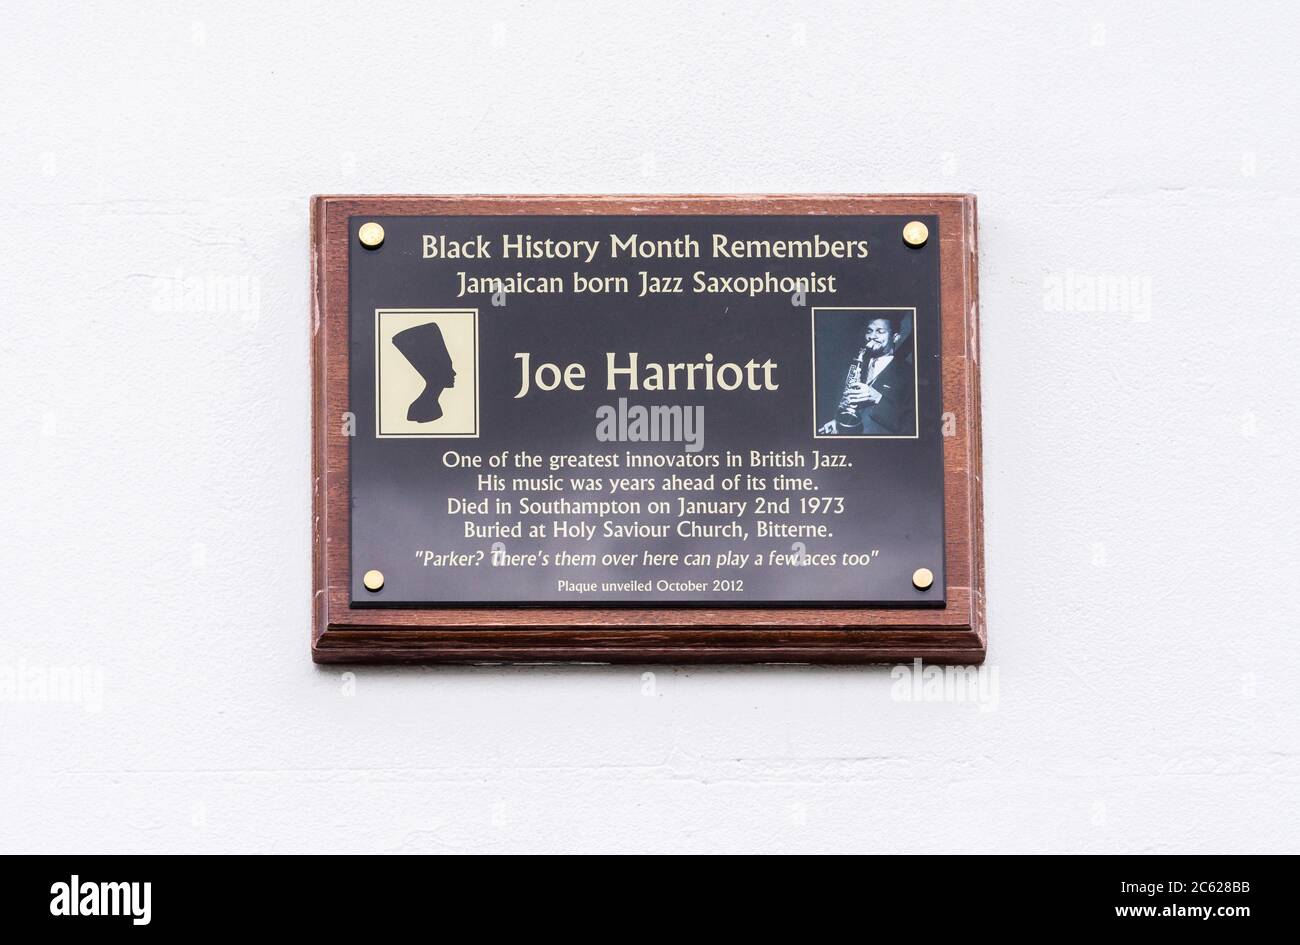 Black history month remembers recognition plaque for Joe Harriott, a black Jazz musician from Southampton, England, UK Stock Photo